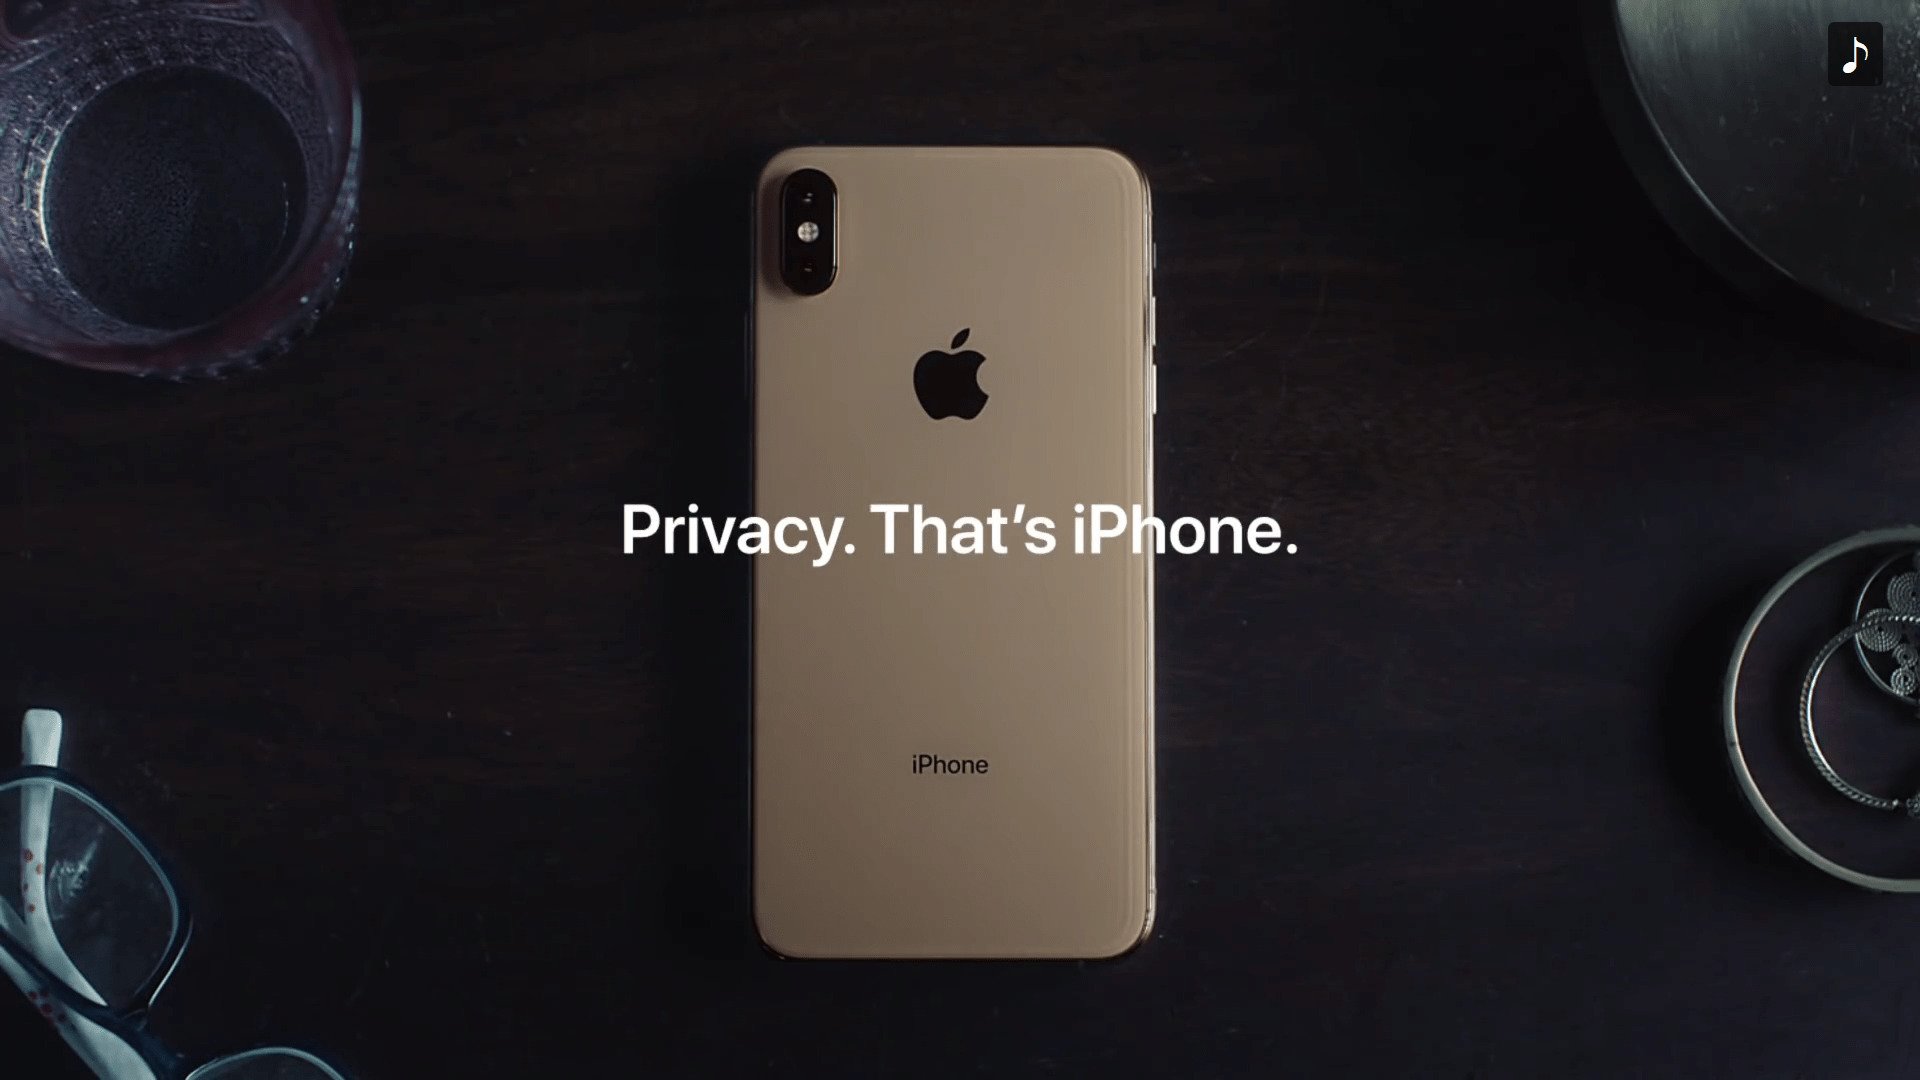 Privacy Matters - An iPhone Ad